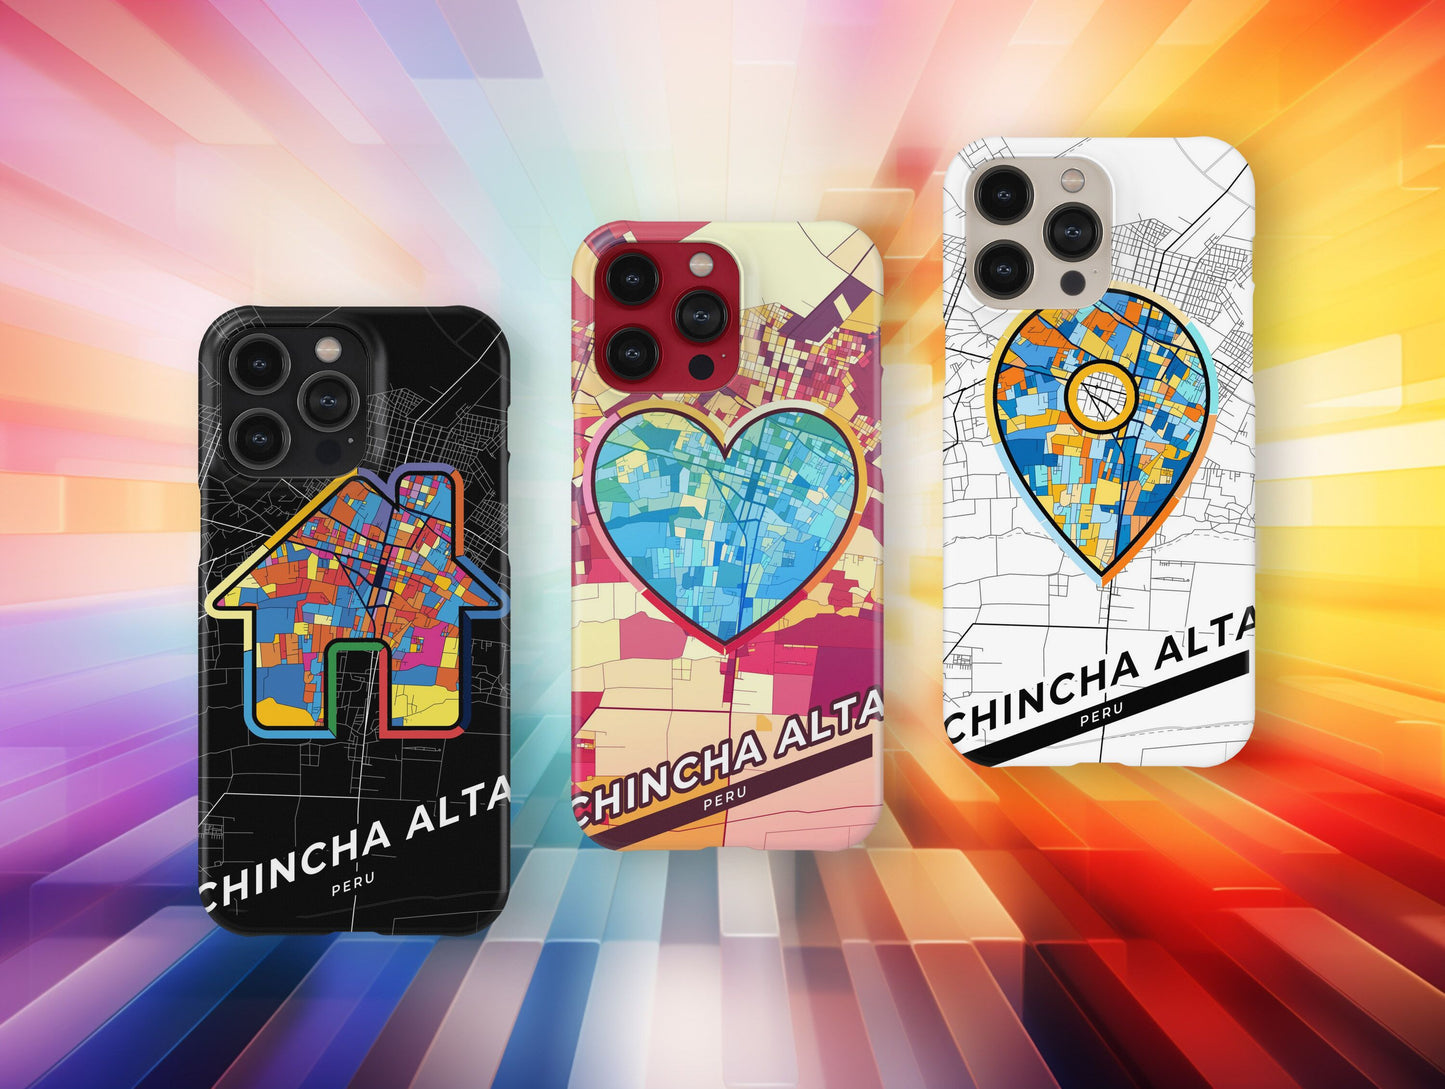 Chincha Alta Peru slim phone case with colorful icon. Birthday, wedding or housewarming gift. Couple match cases.